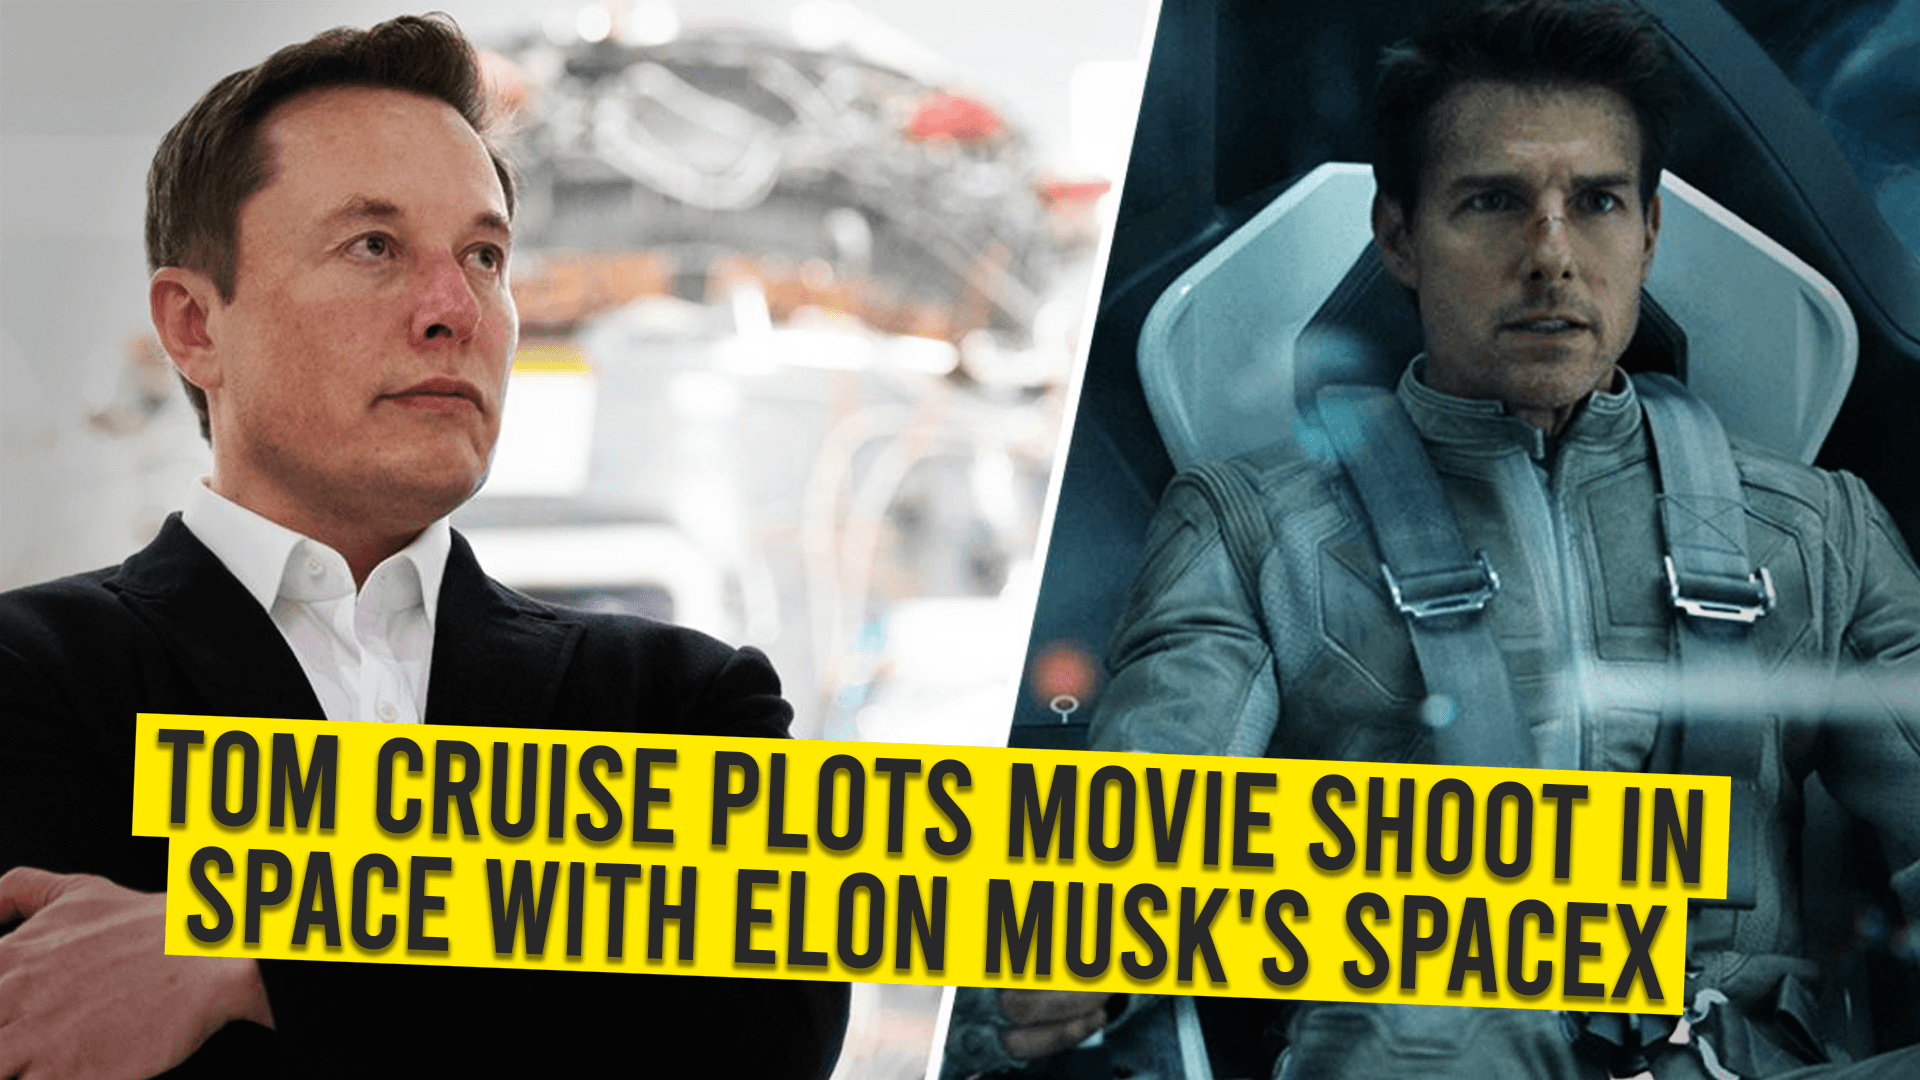 Tom Cruise Plots Movie Shoot In Space With Elon Musk’s Space X